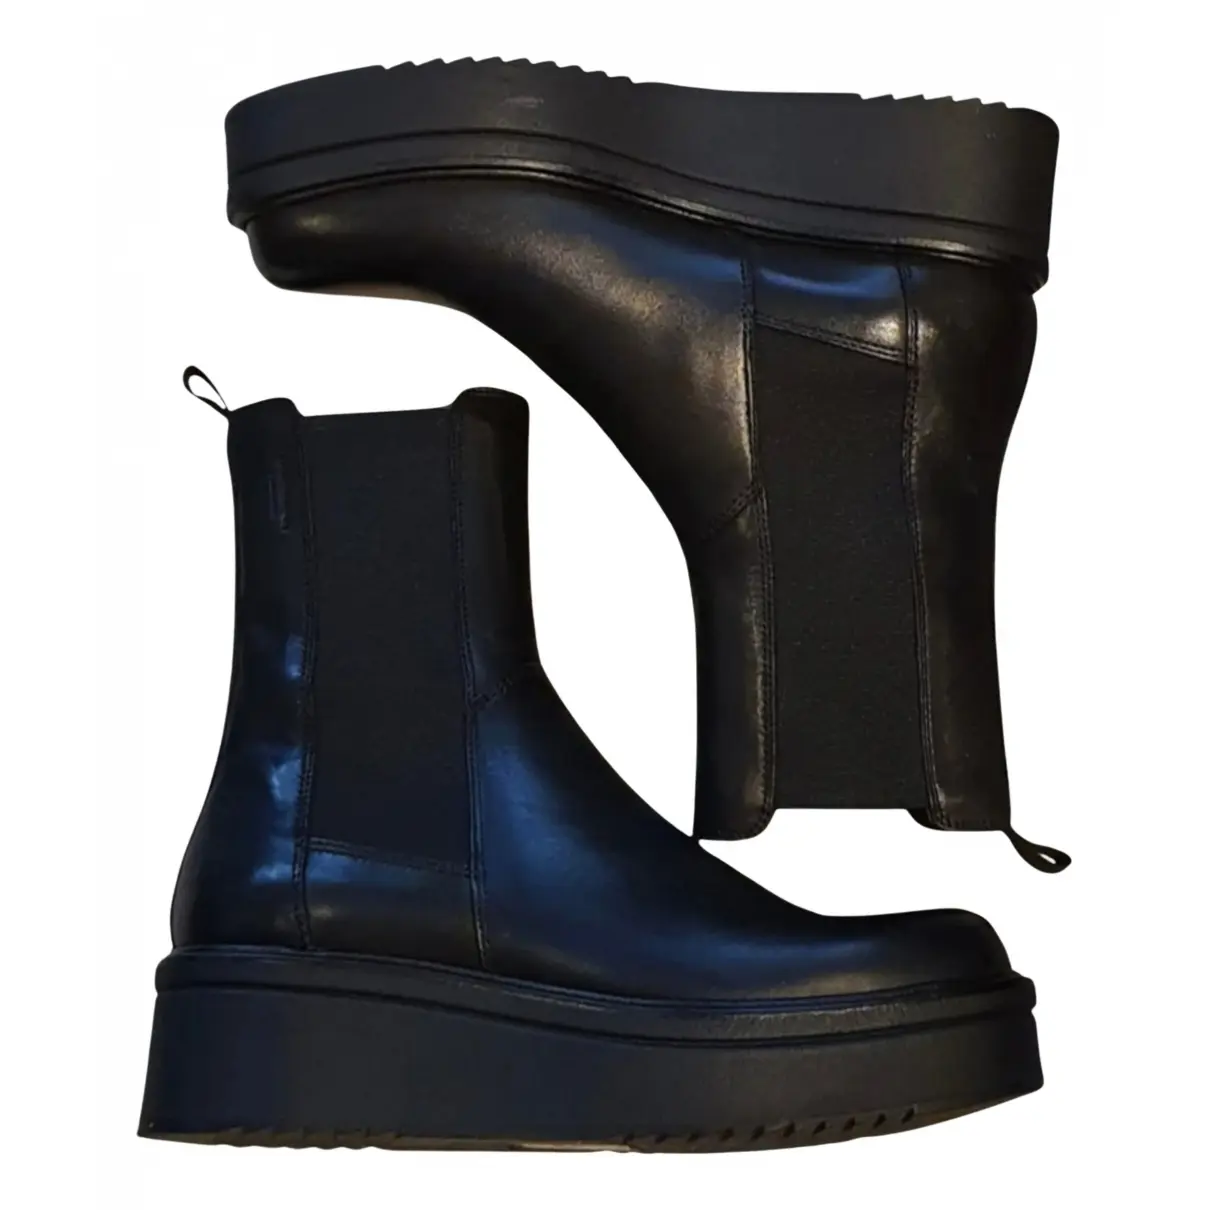 Leather ankle boots Vagabond